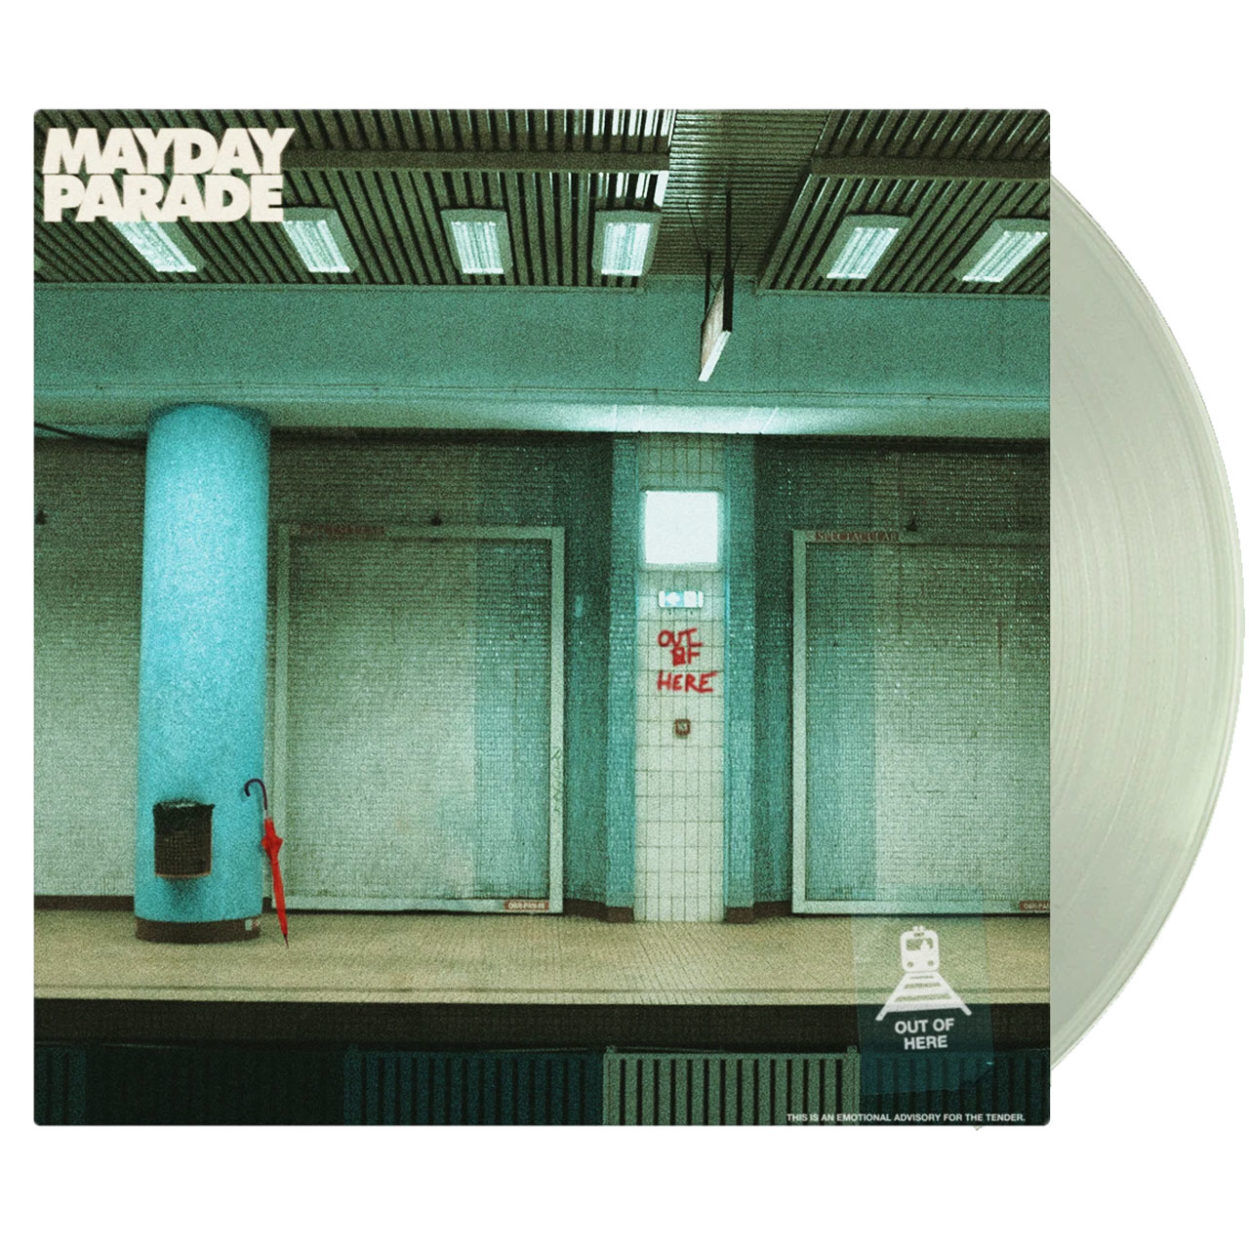 MAYDAY PARADE Out Of Here Alternate Cover Vinyl